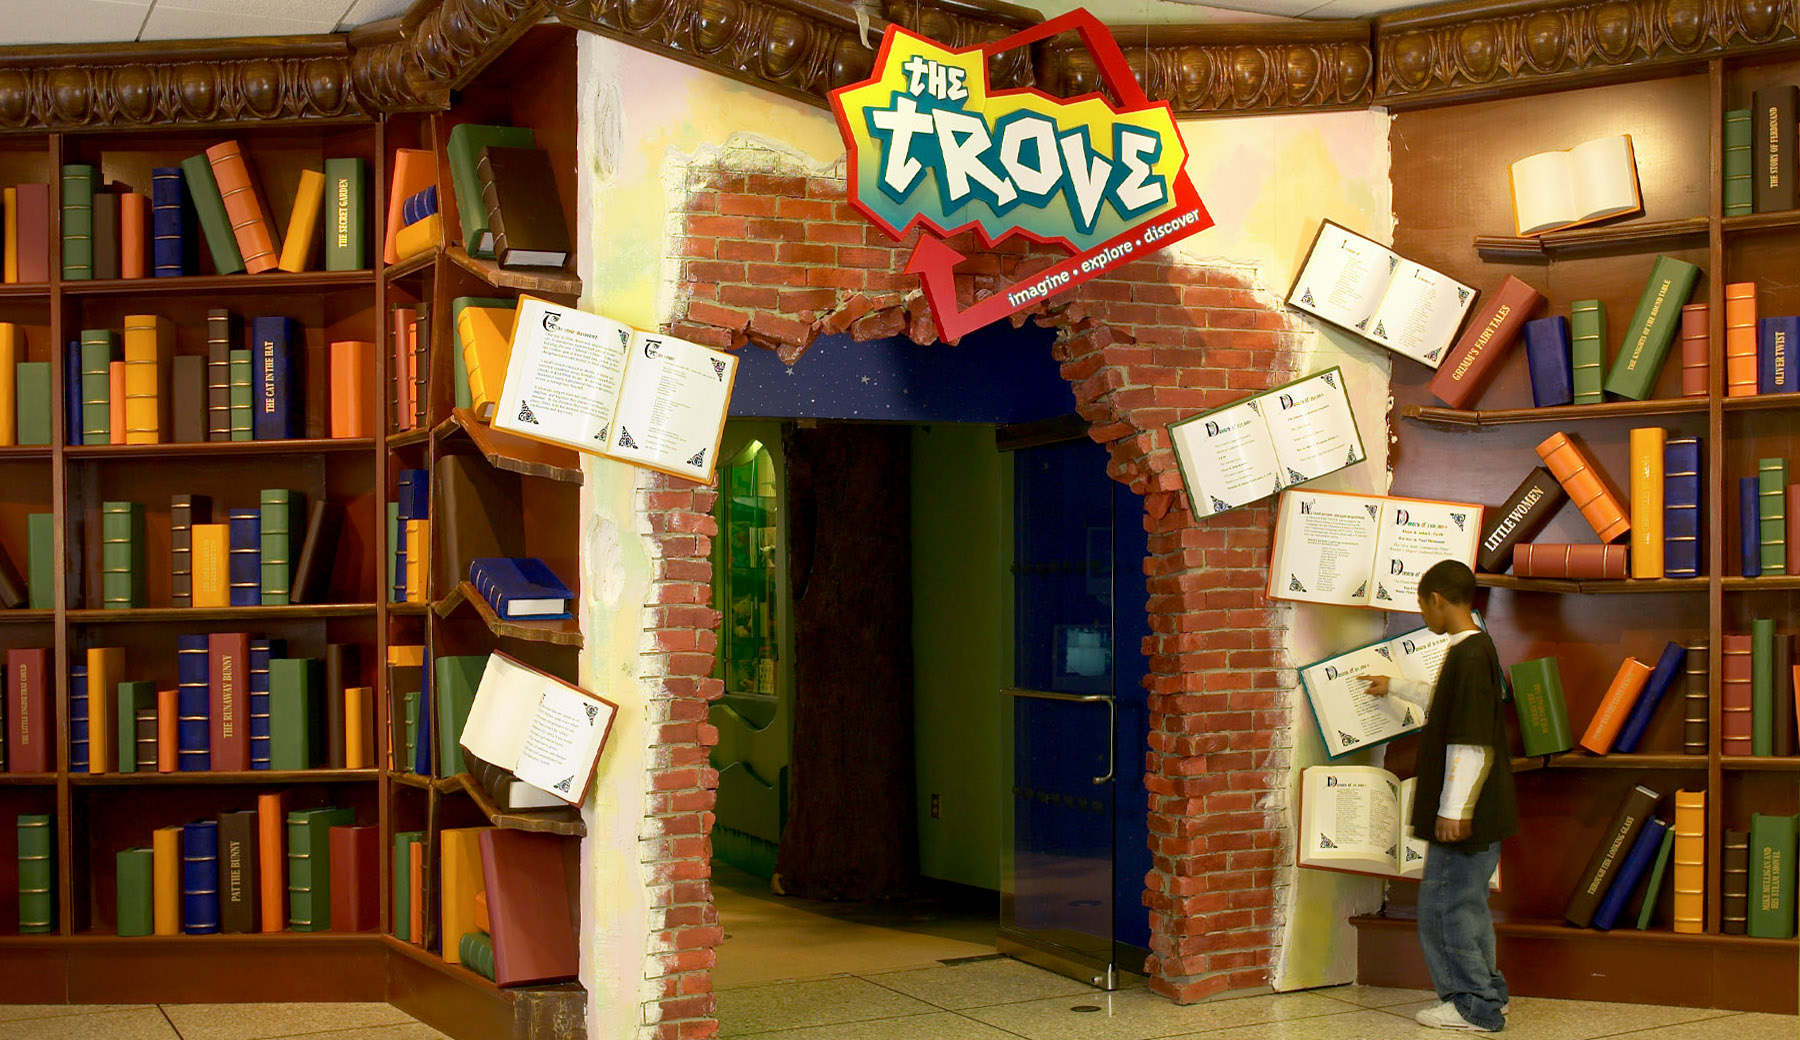 Upper Lobby Entrance to Children’s Library, “The Trove.”